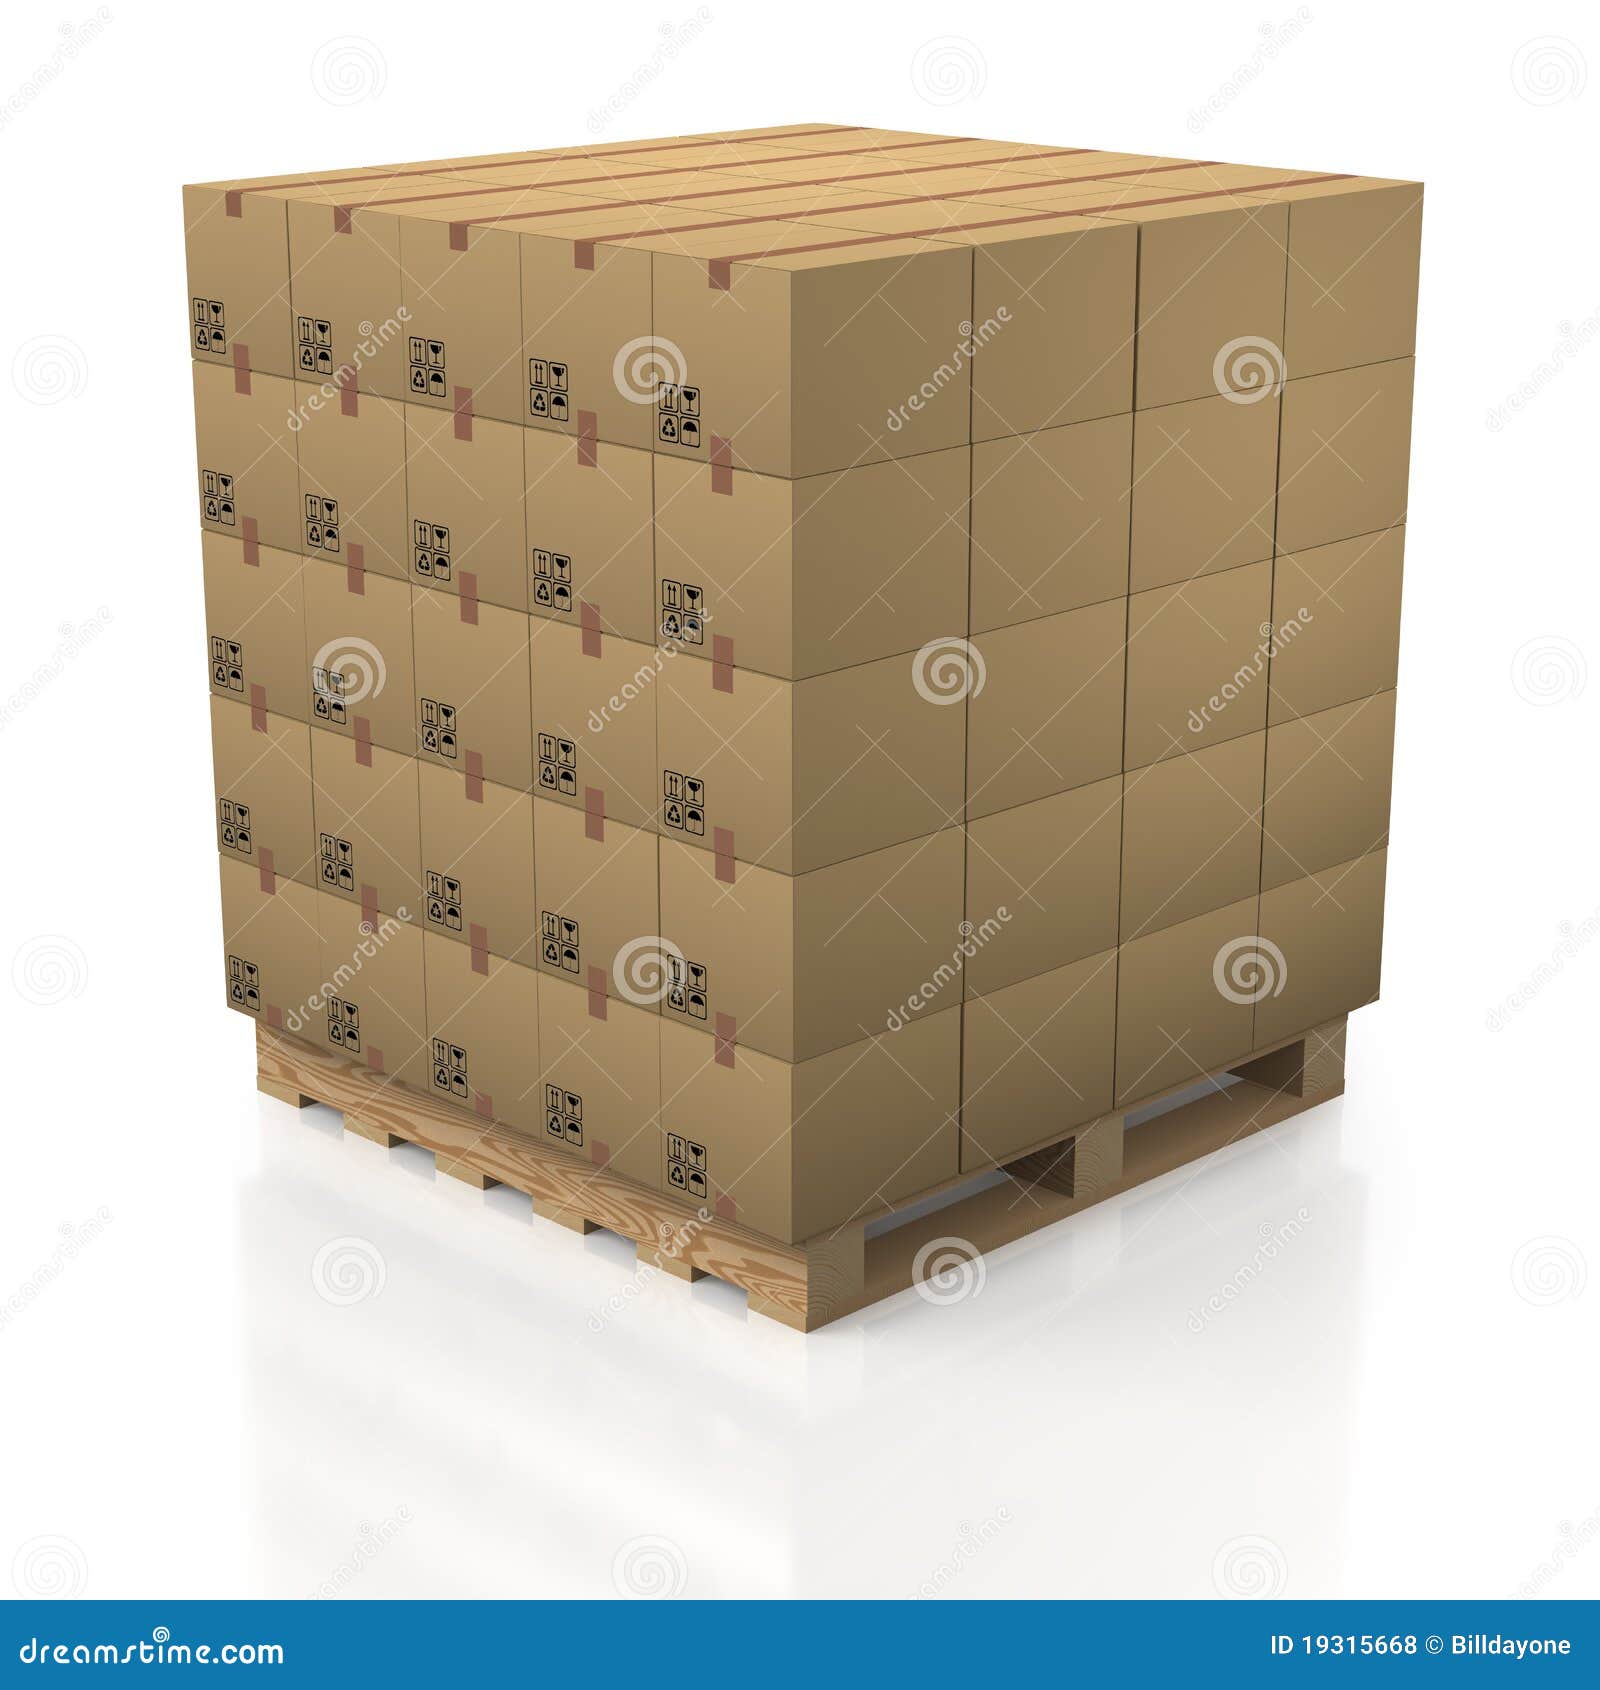 cardboard boxes in tidy stack with wooden palette